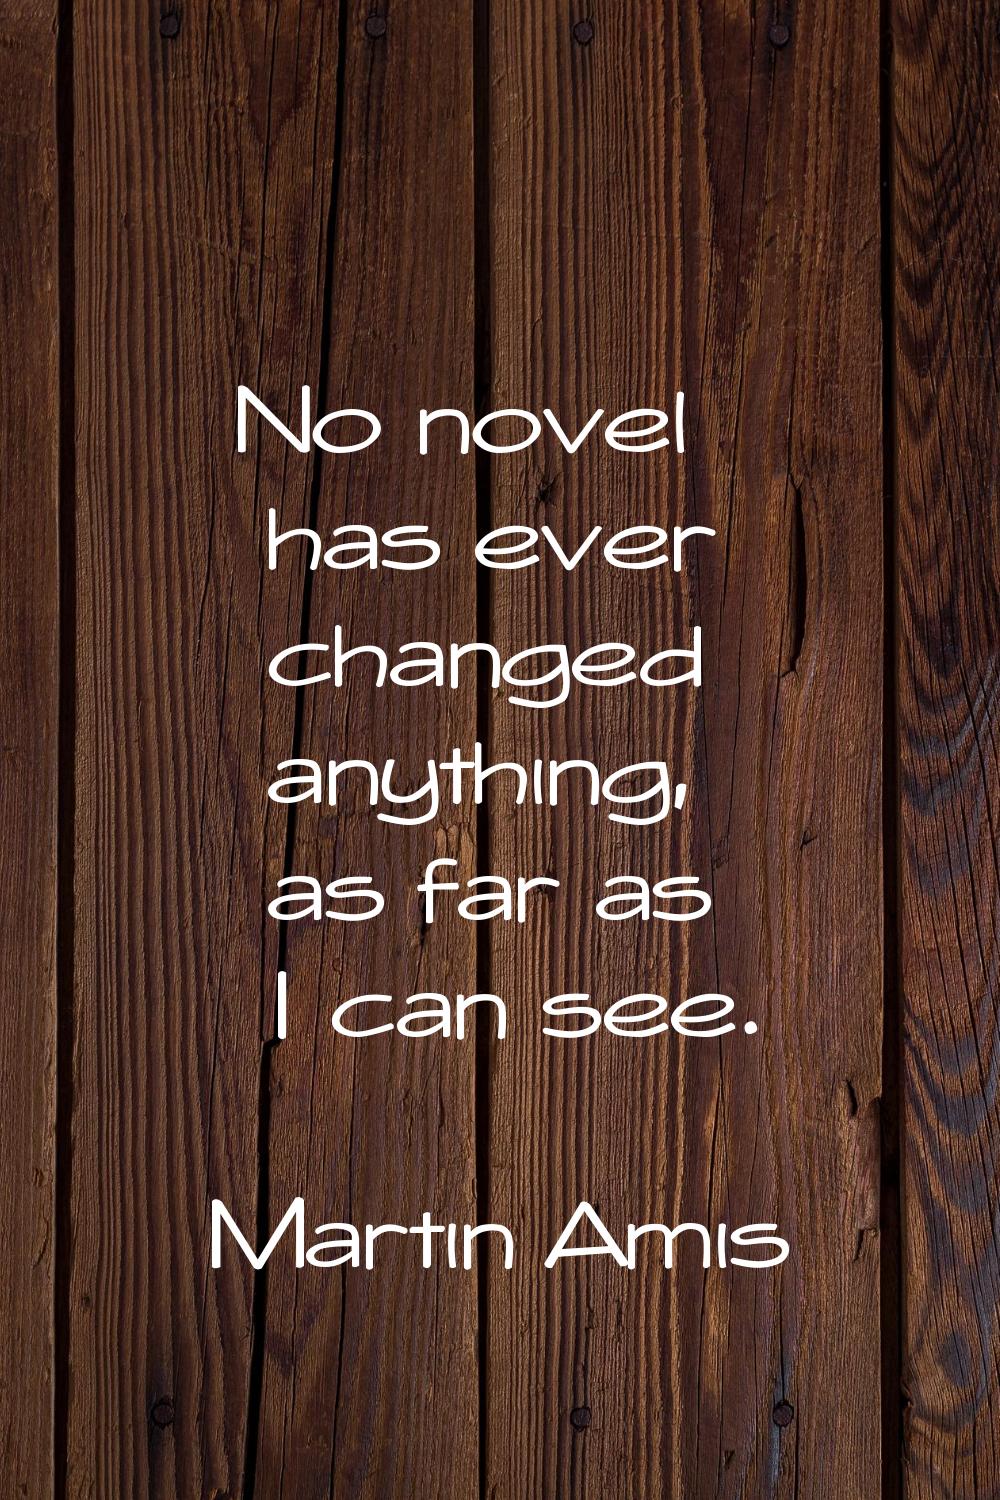 No novel has ever changed anything, as far as I can see.